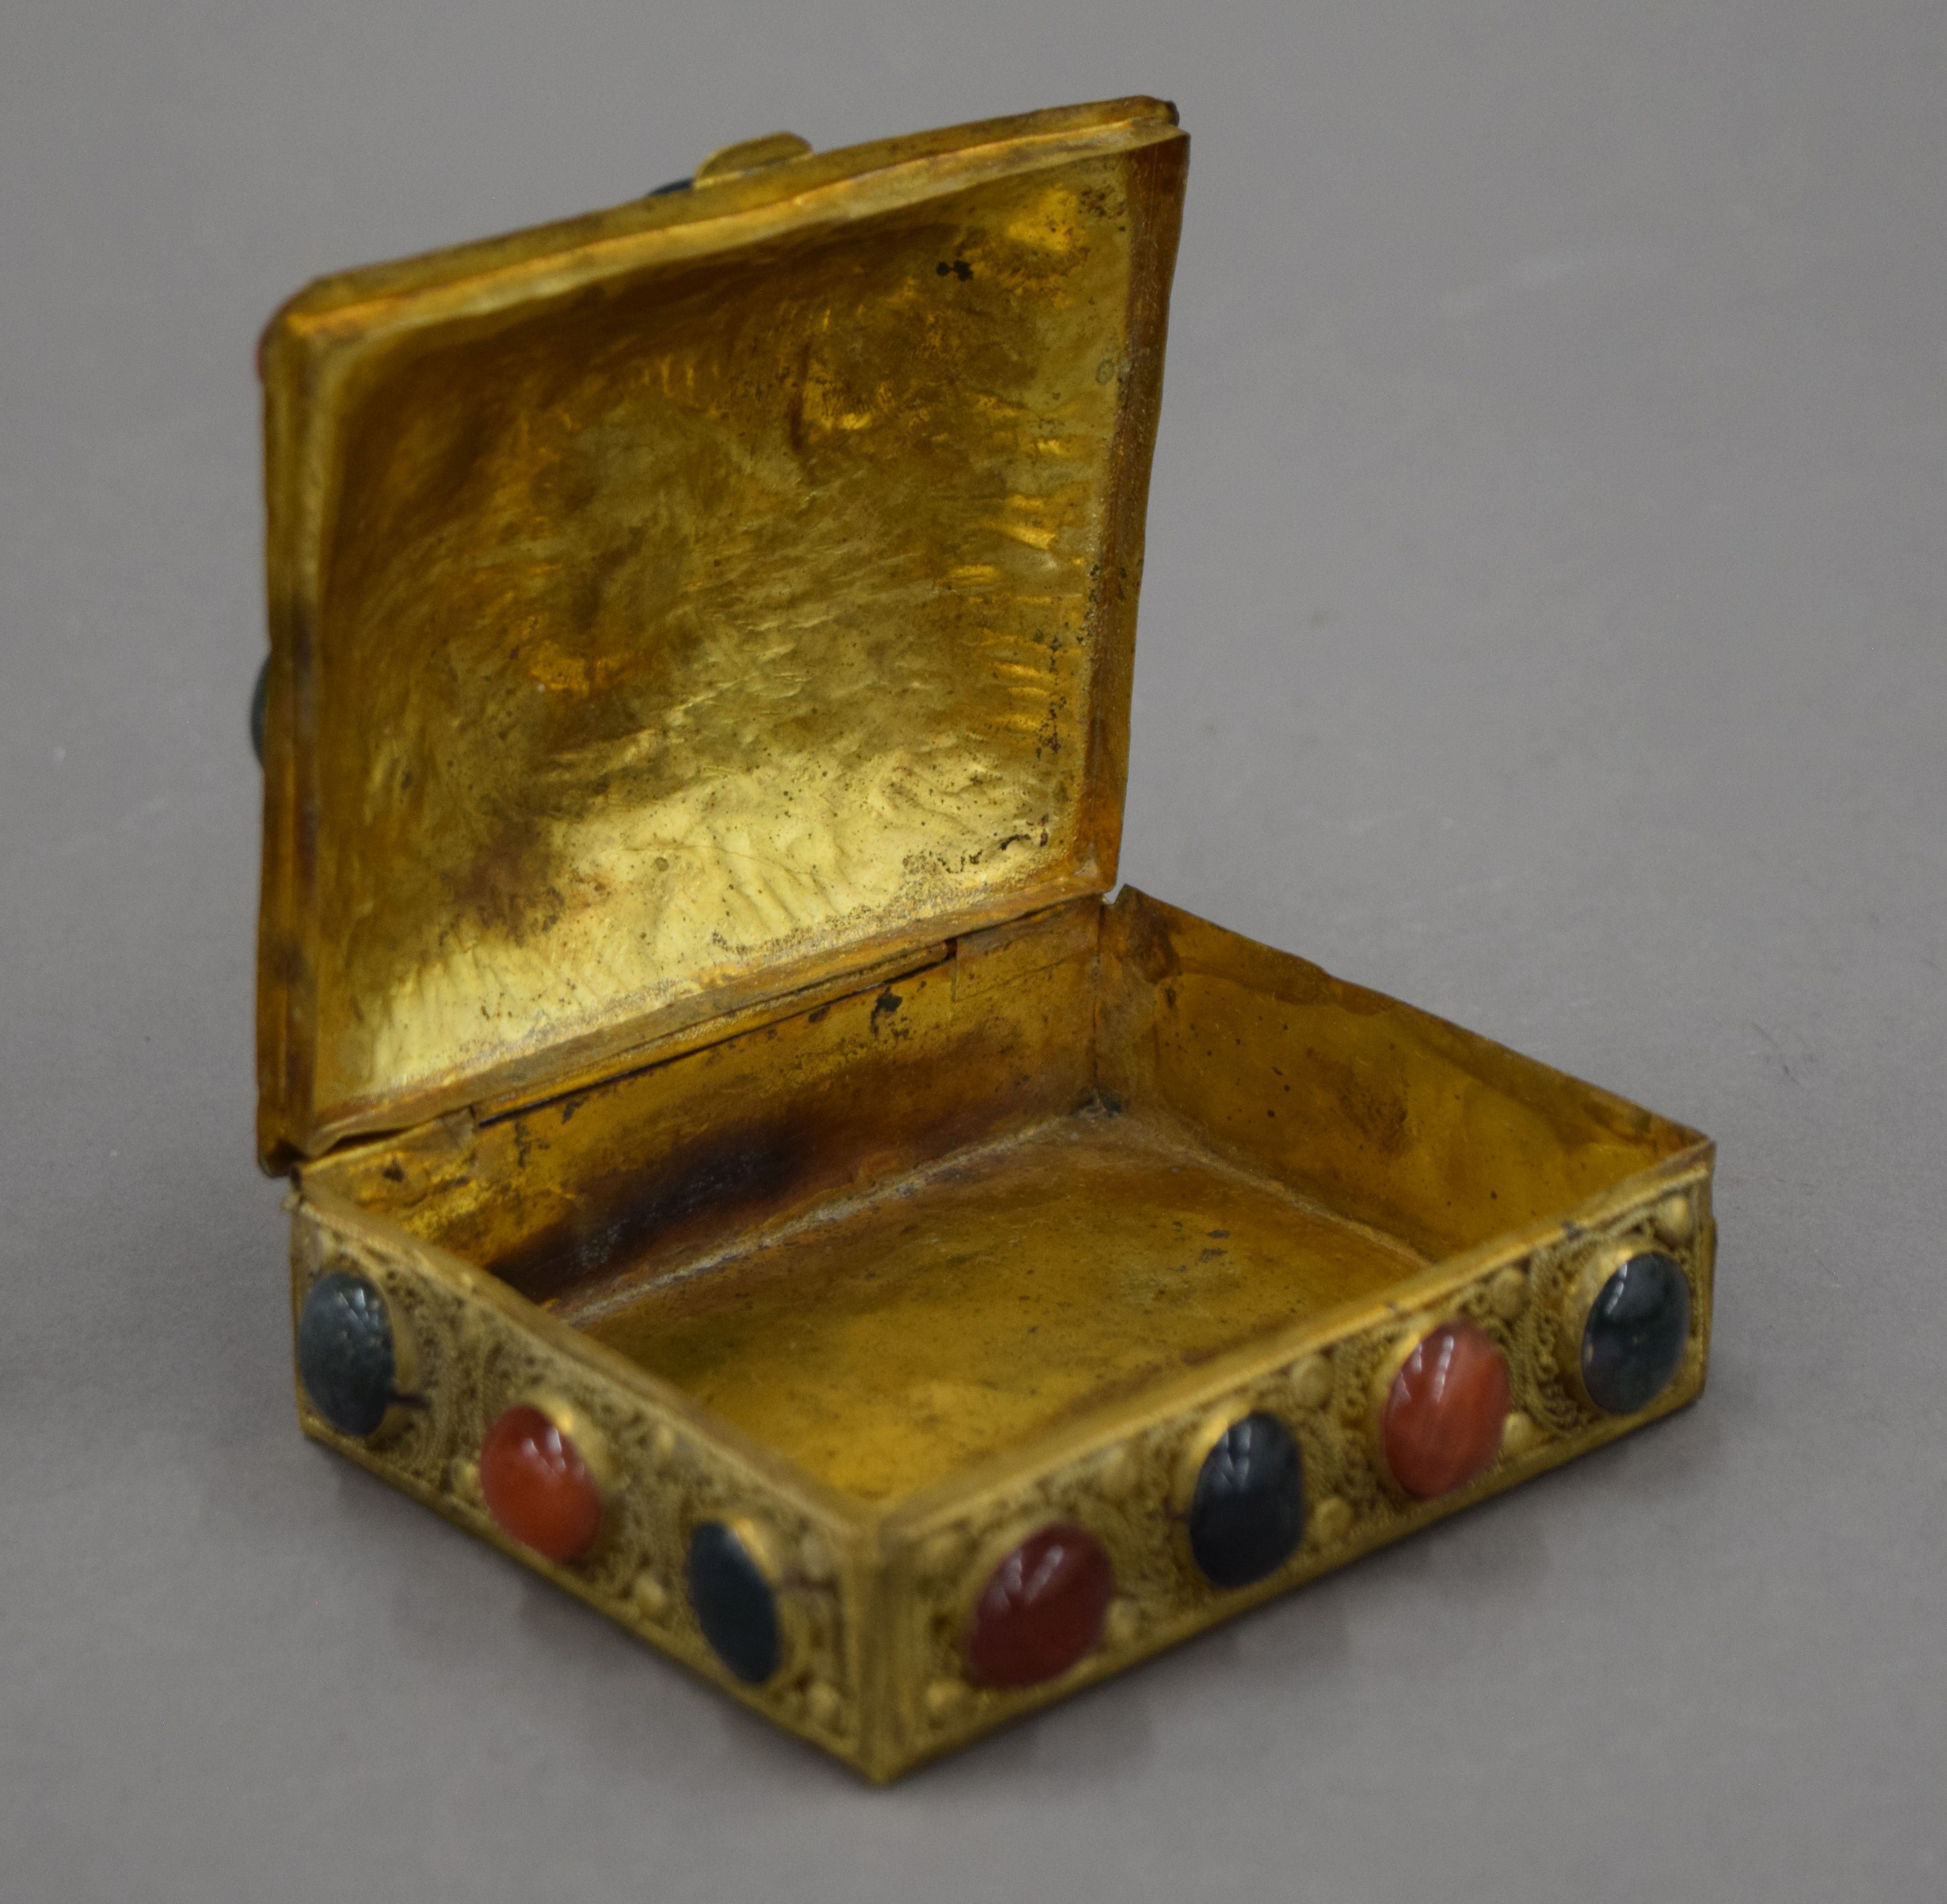 An Indian gilt box set with cabochon stones. 11 cm wide. - Image 4 of 4